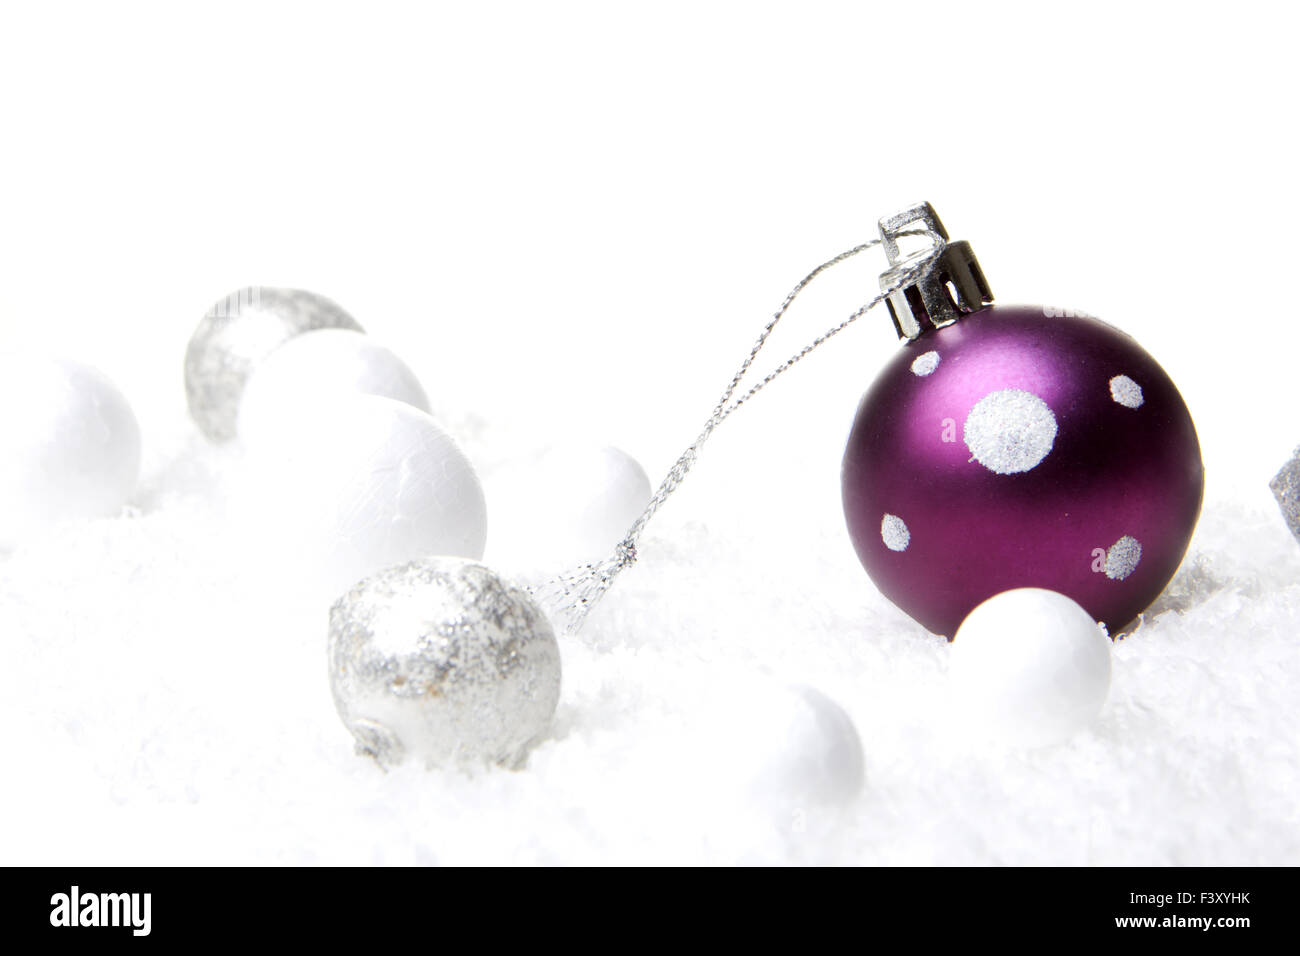 christmas ornament violet and white Stock Photo